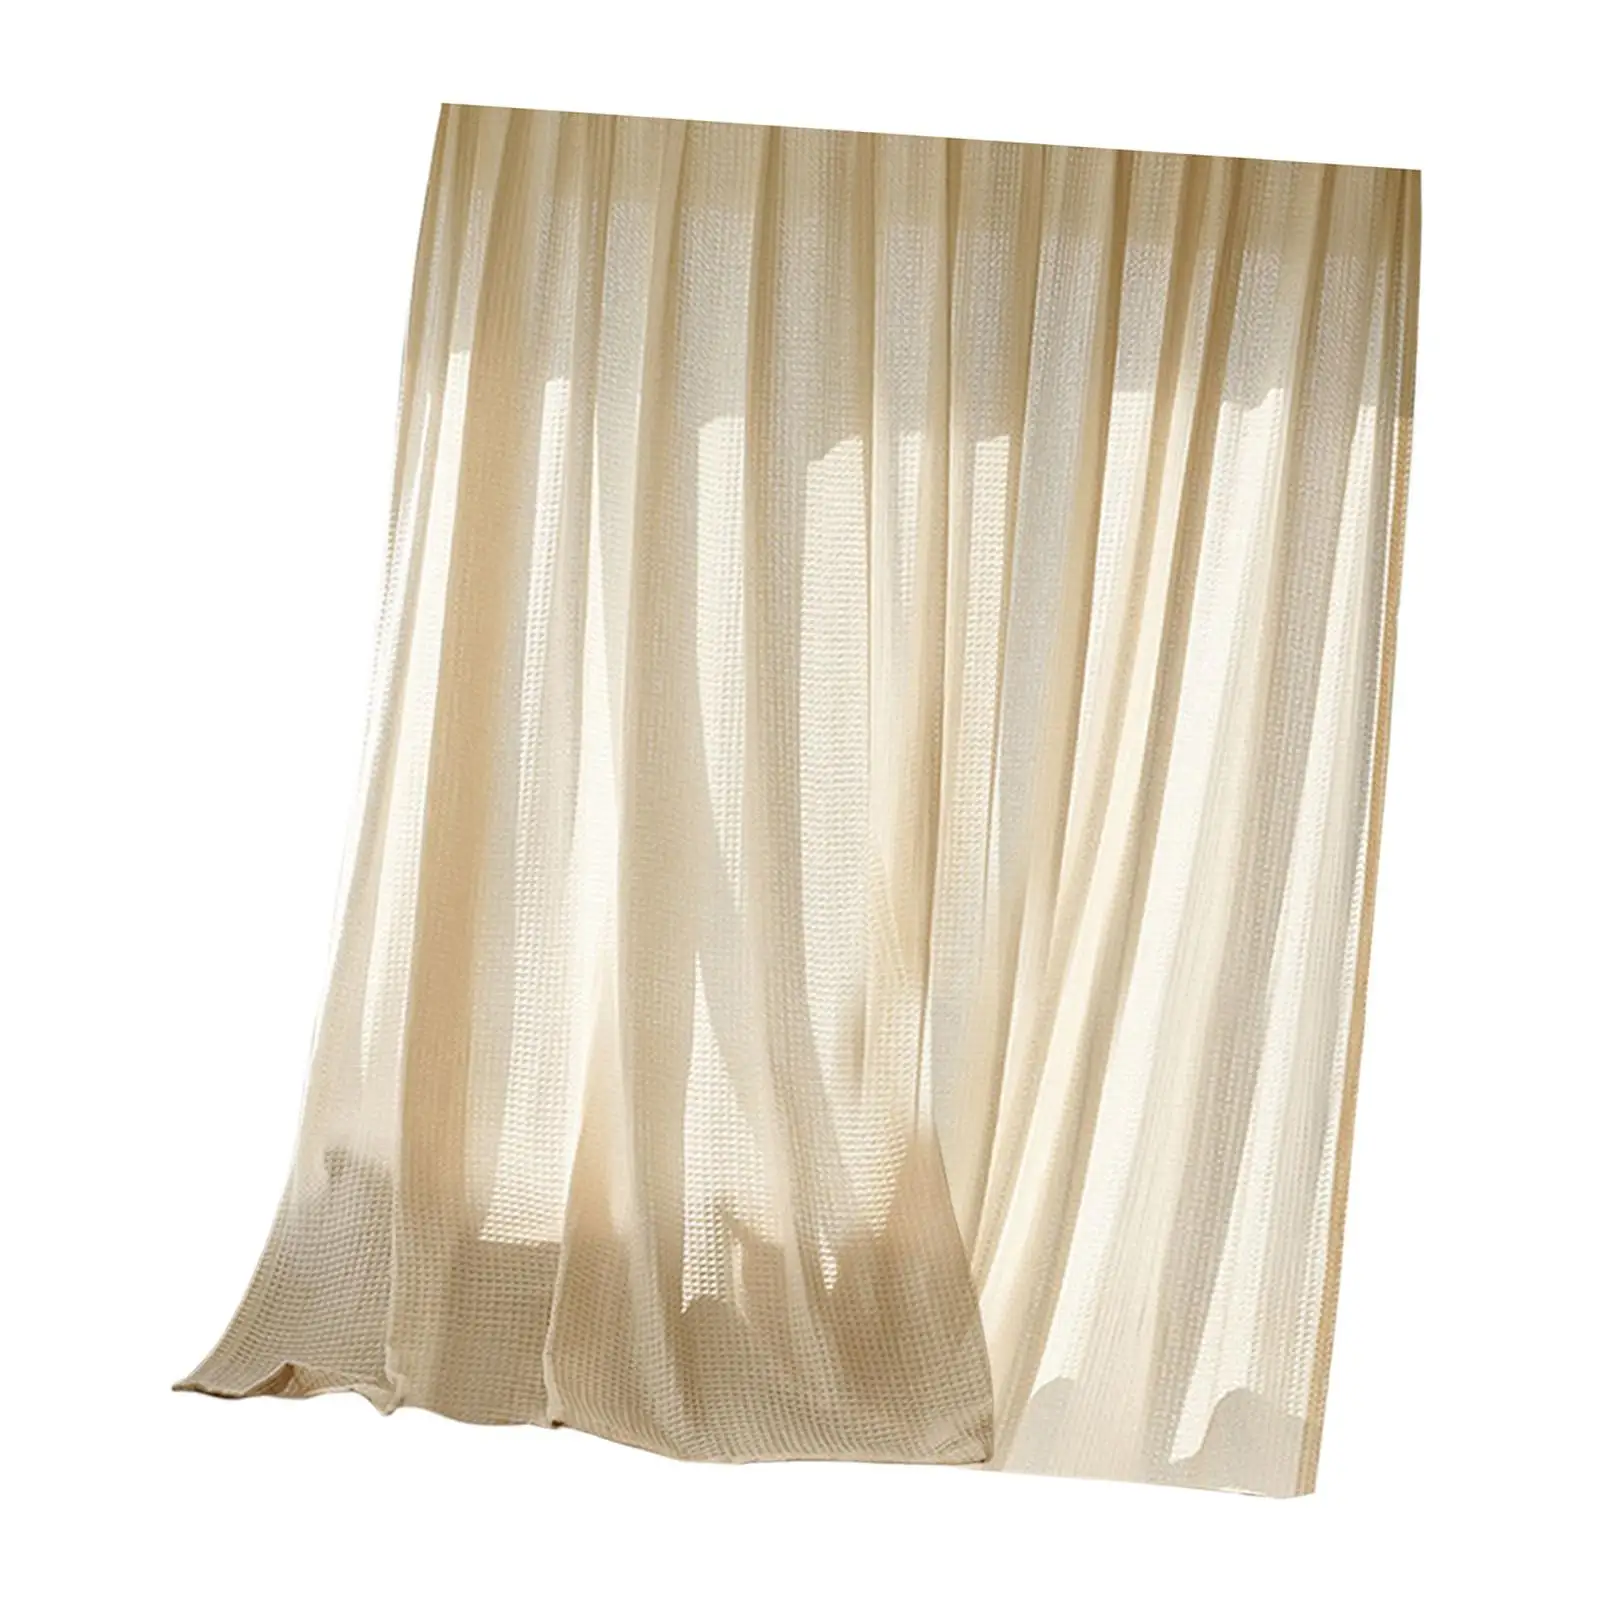 Lightweight Breathable Drapes Door Curtain Window Curtain Elegant Panels for Bedroom Study Living Room Office Decor